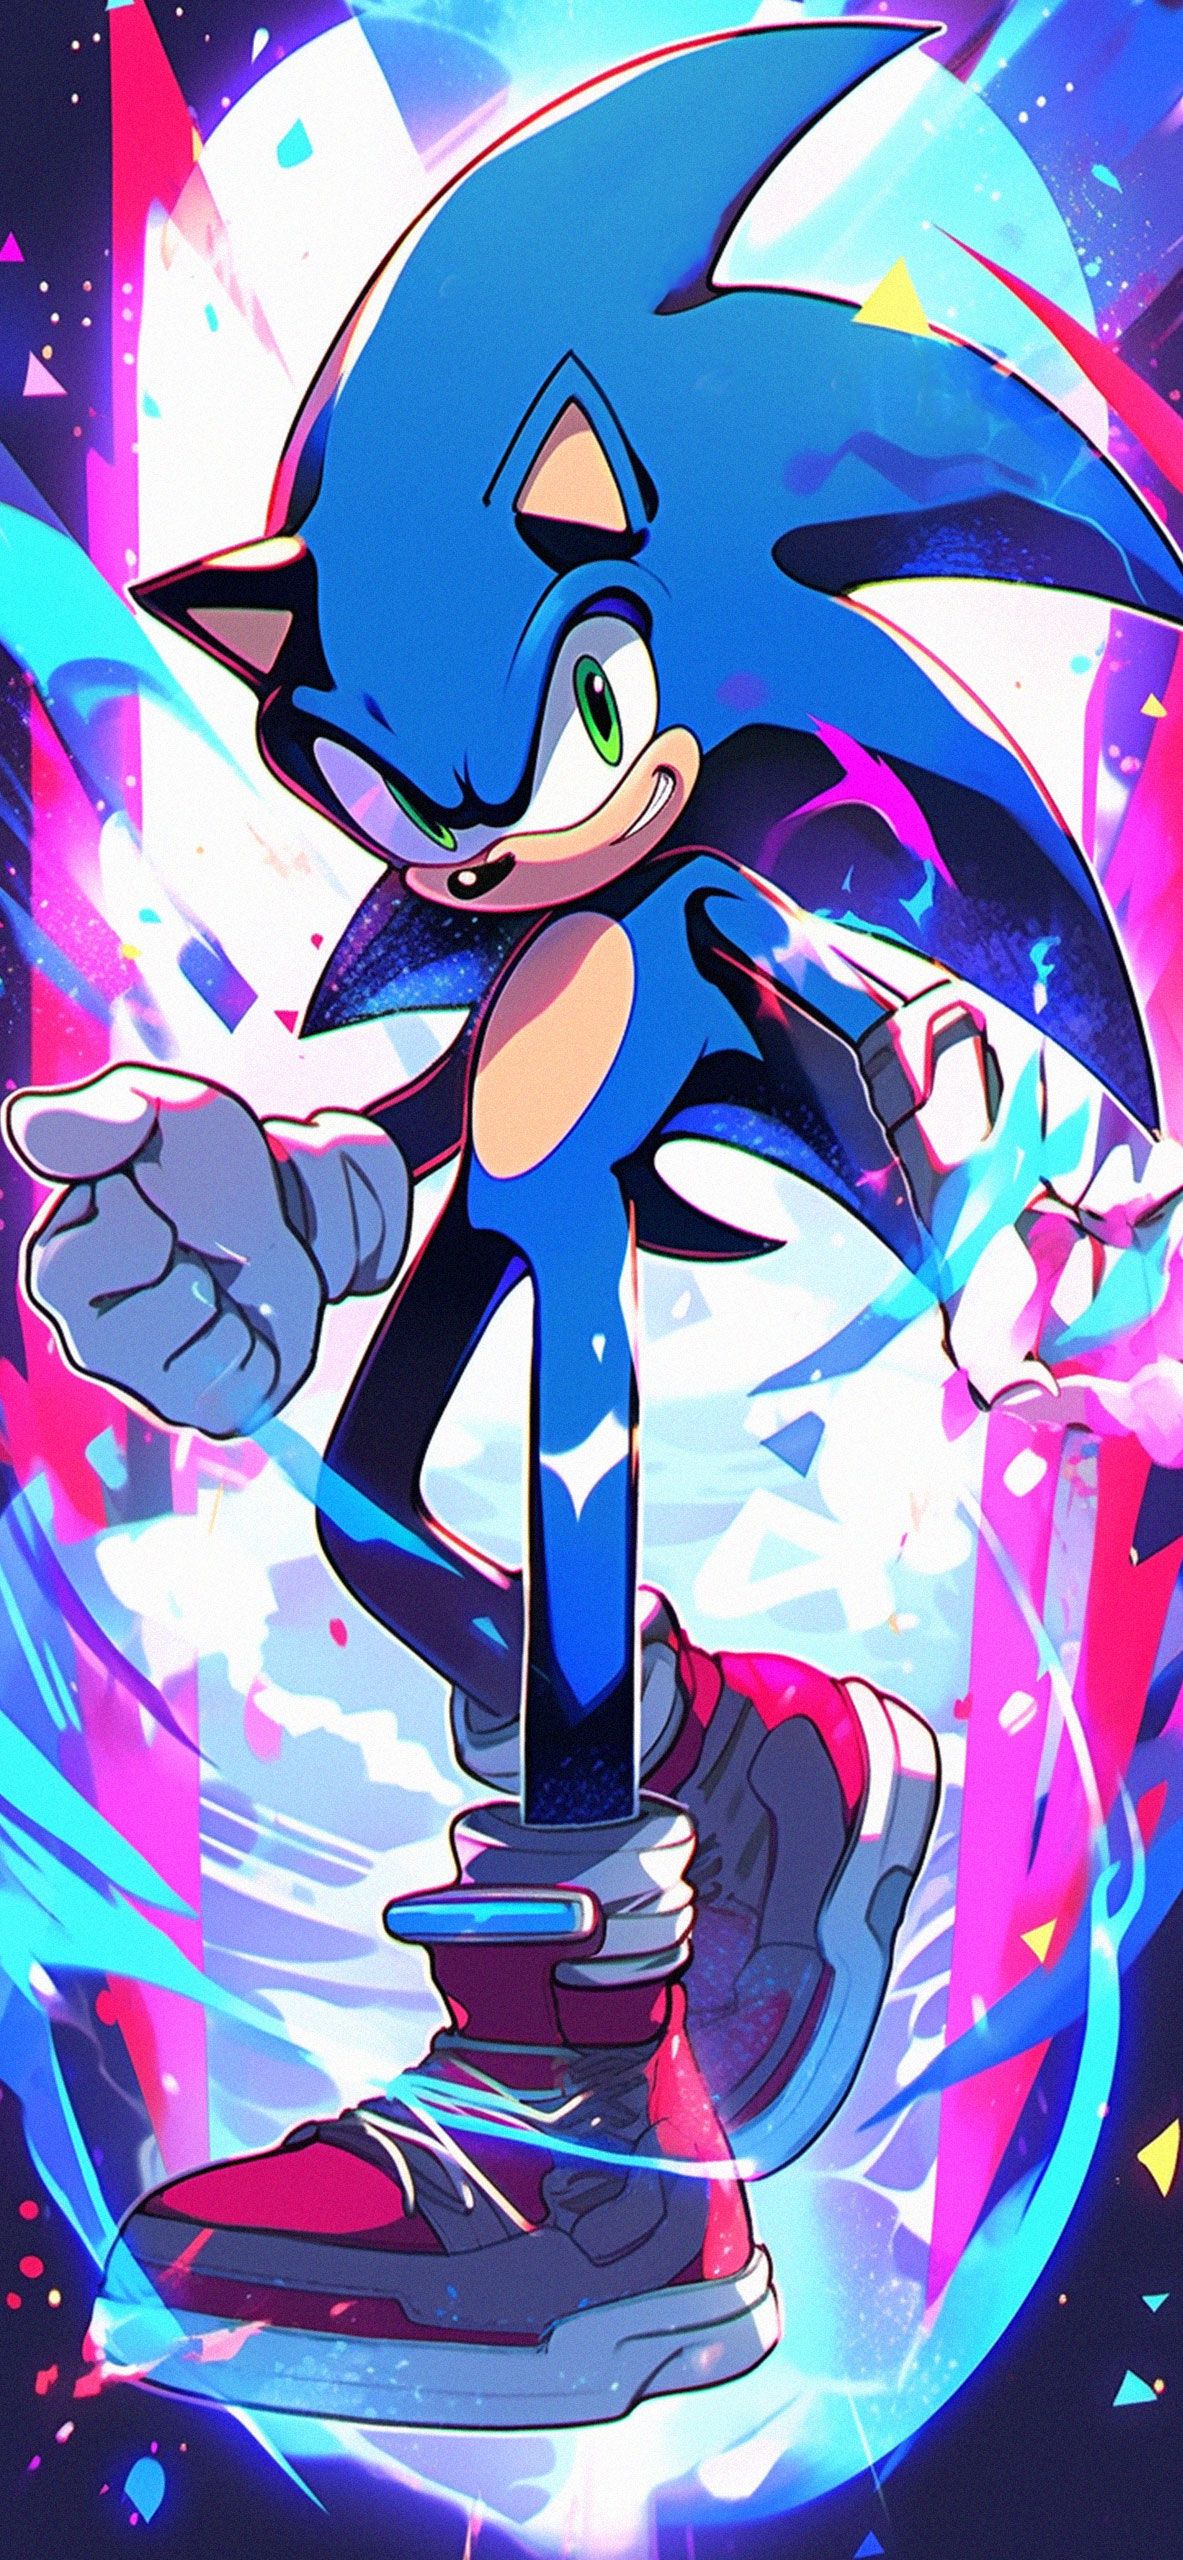 IPhone wallpaper of Sonic the Hedgehog running through a neon background - Sonic